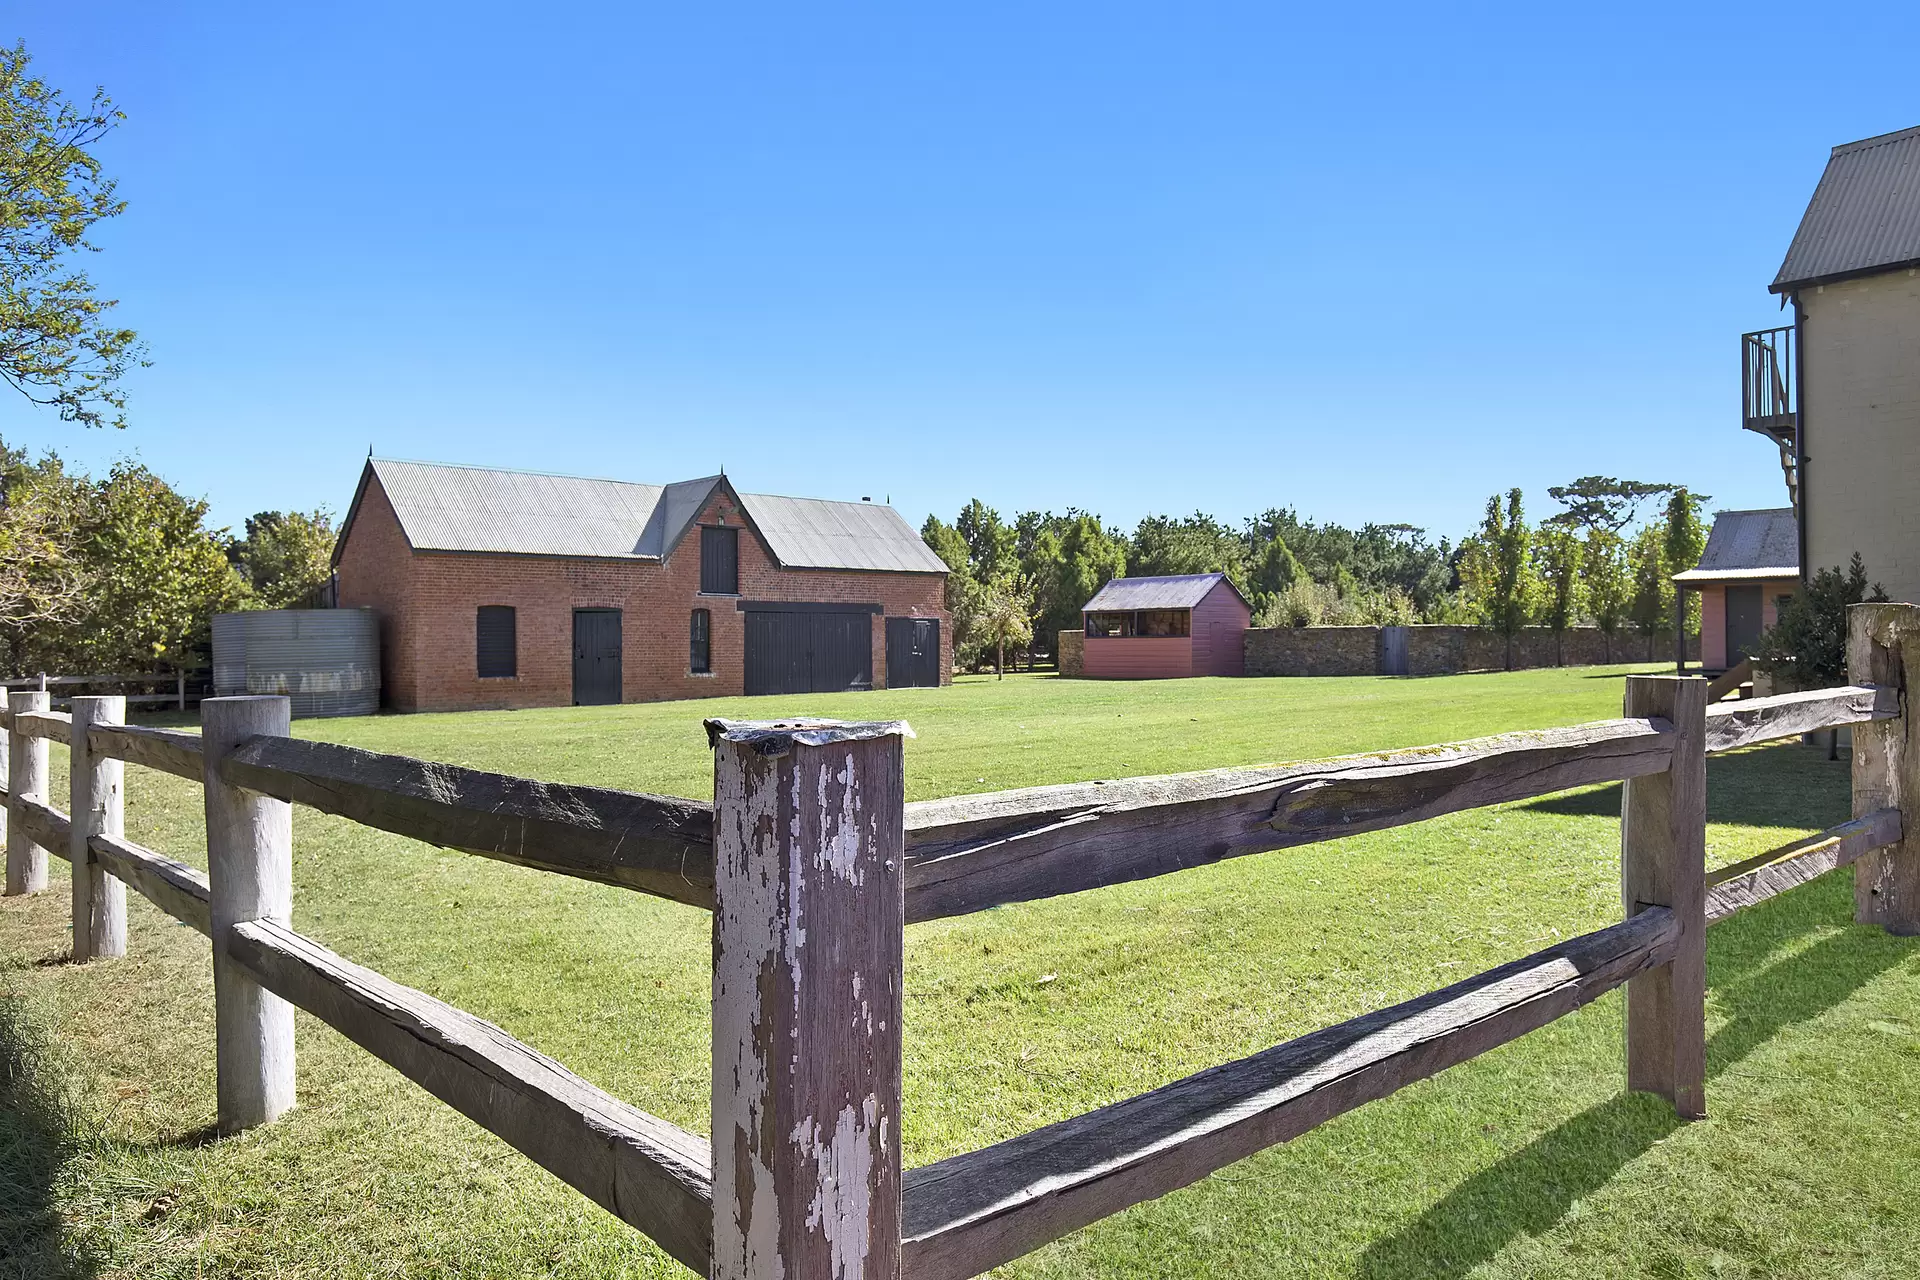 Photo #16: 157 Old South Road, Breadalbane - Sold by Drew Lindsay Sotheby's International Realty